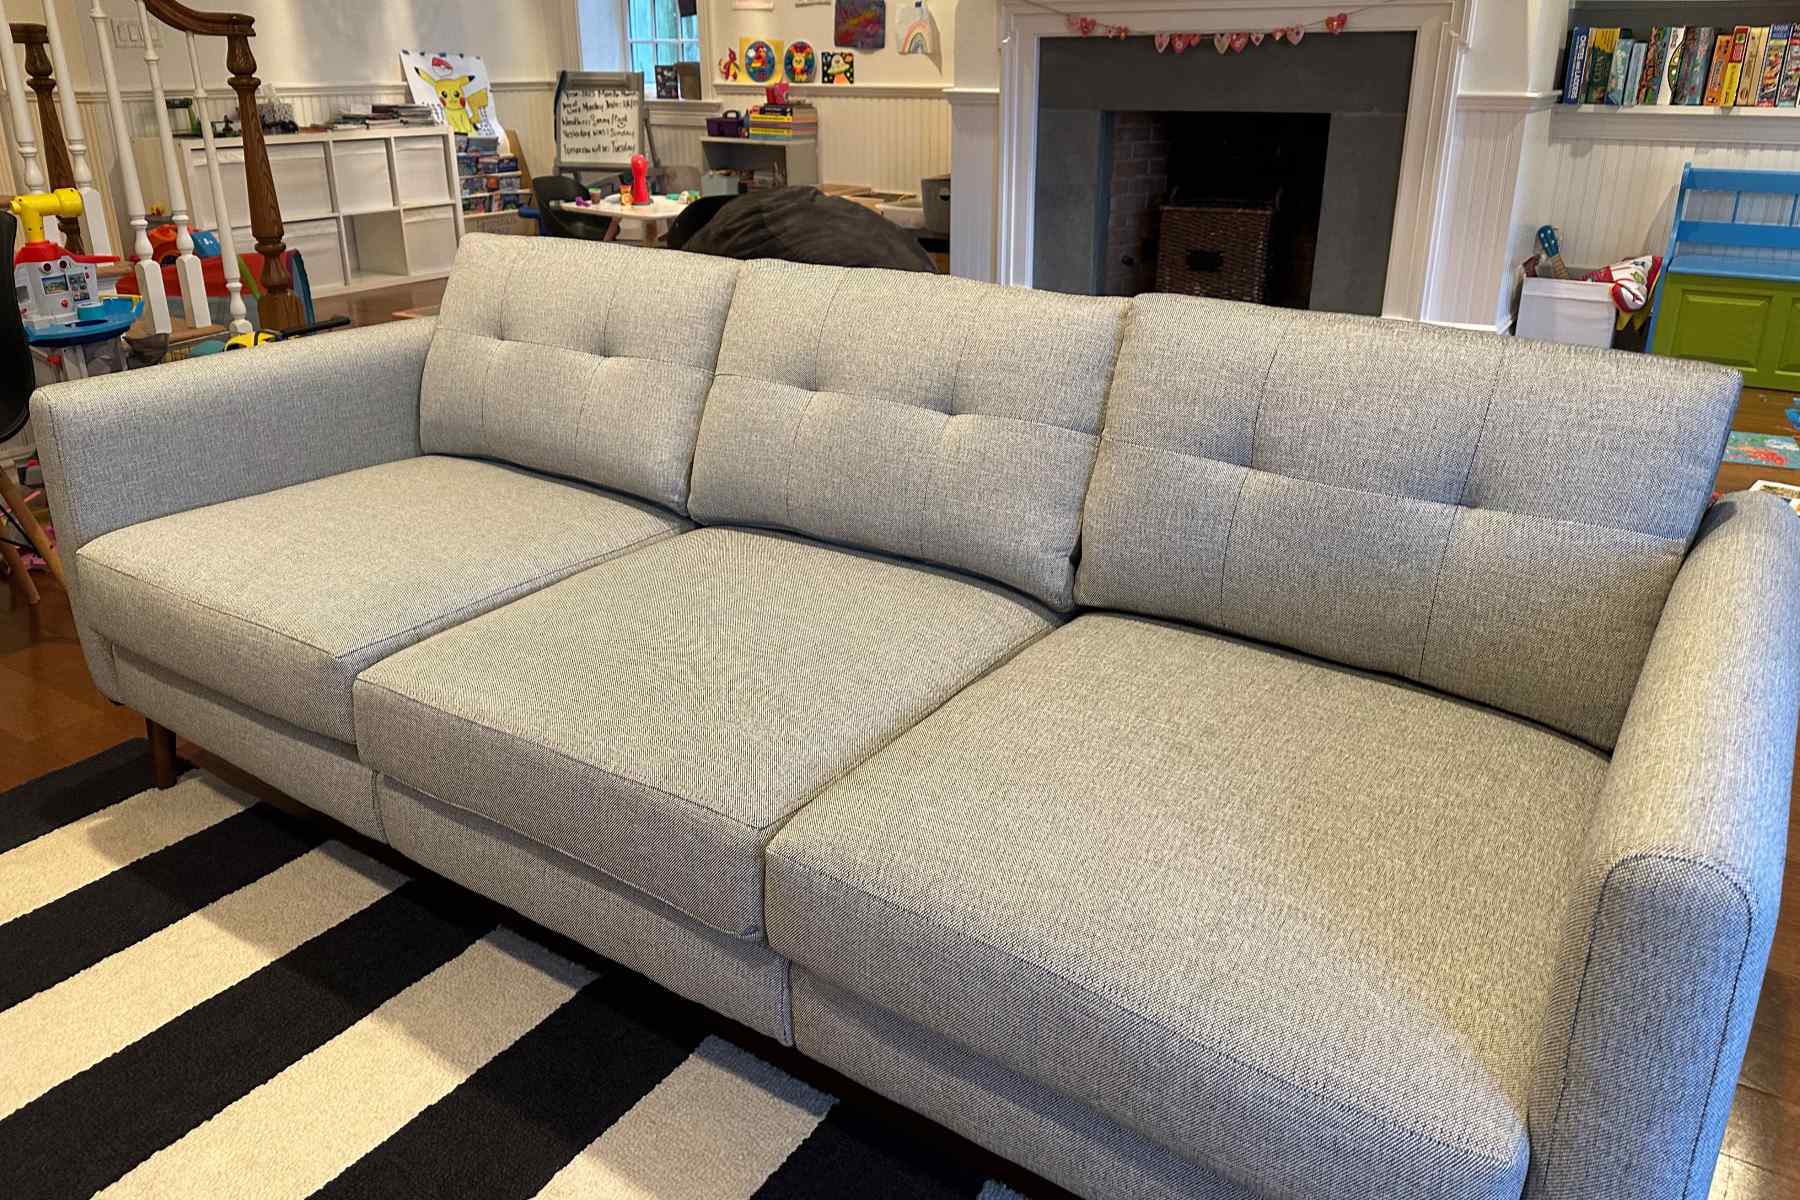 You Won't Believe If A 40 Inch Wide Sofa Can Fit Through A 36 Inch Door!